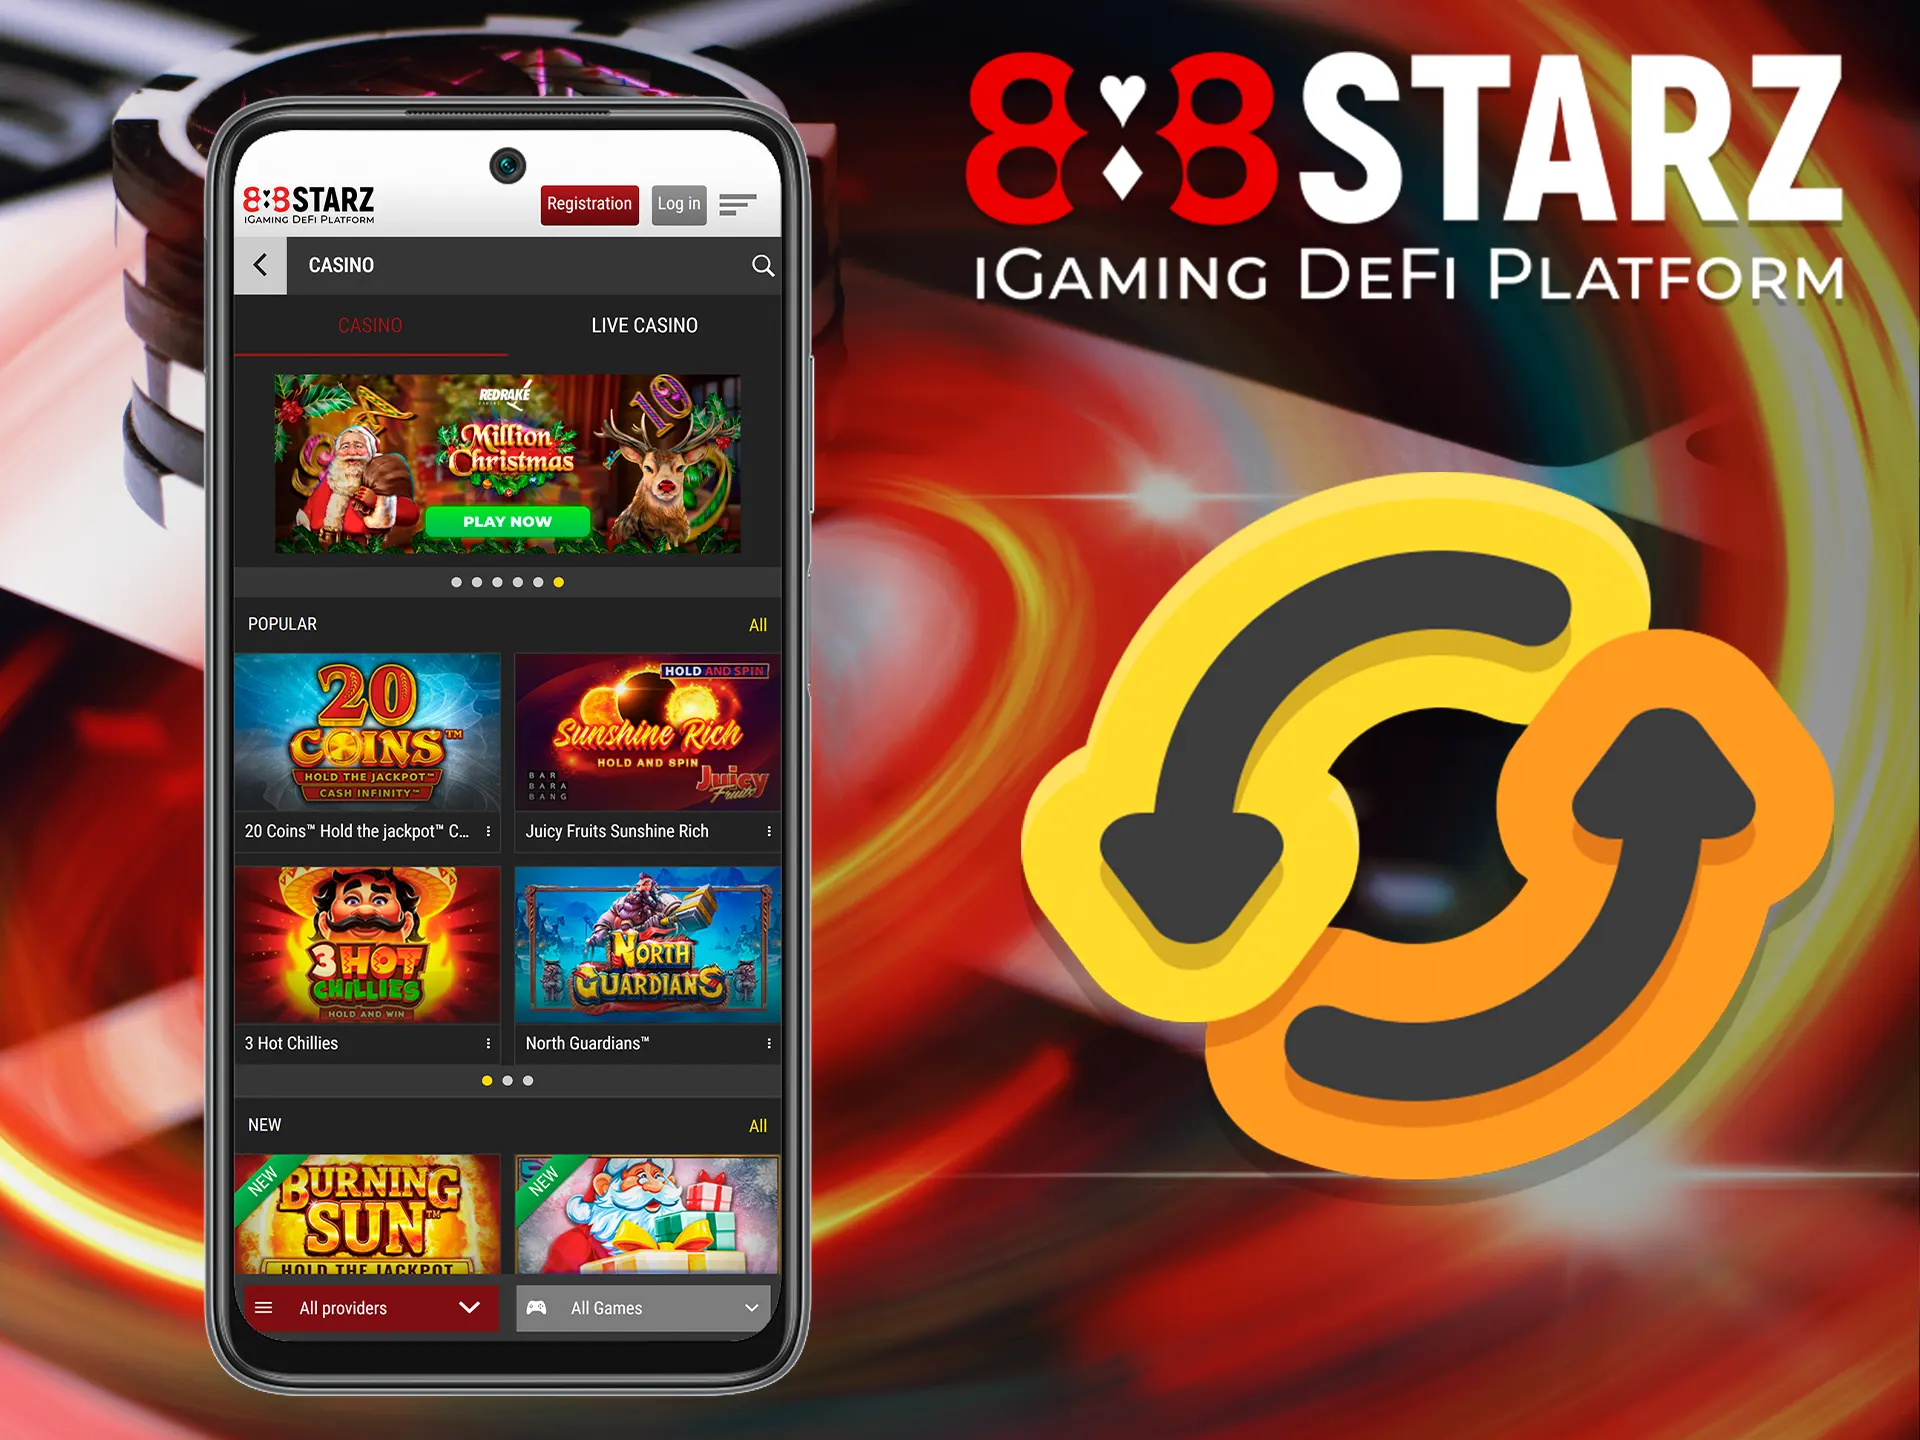 Learn how to bet on the latest version of 888starz smartphone software.